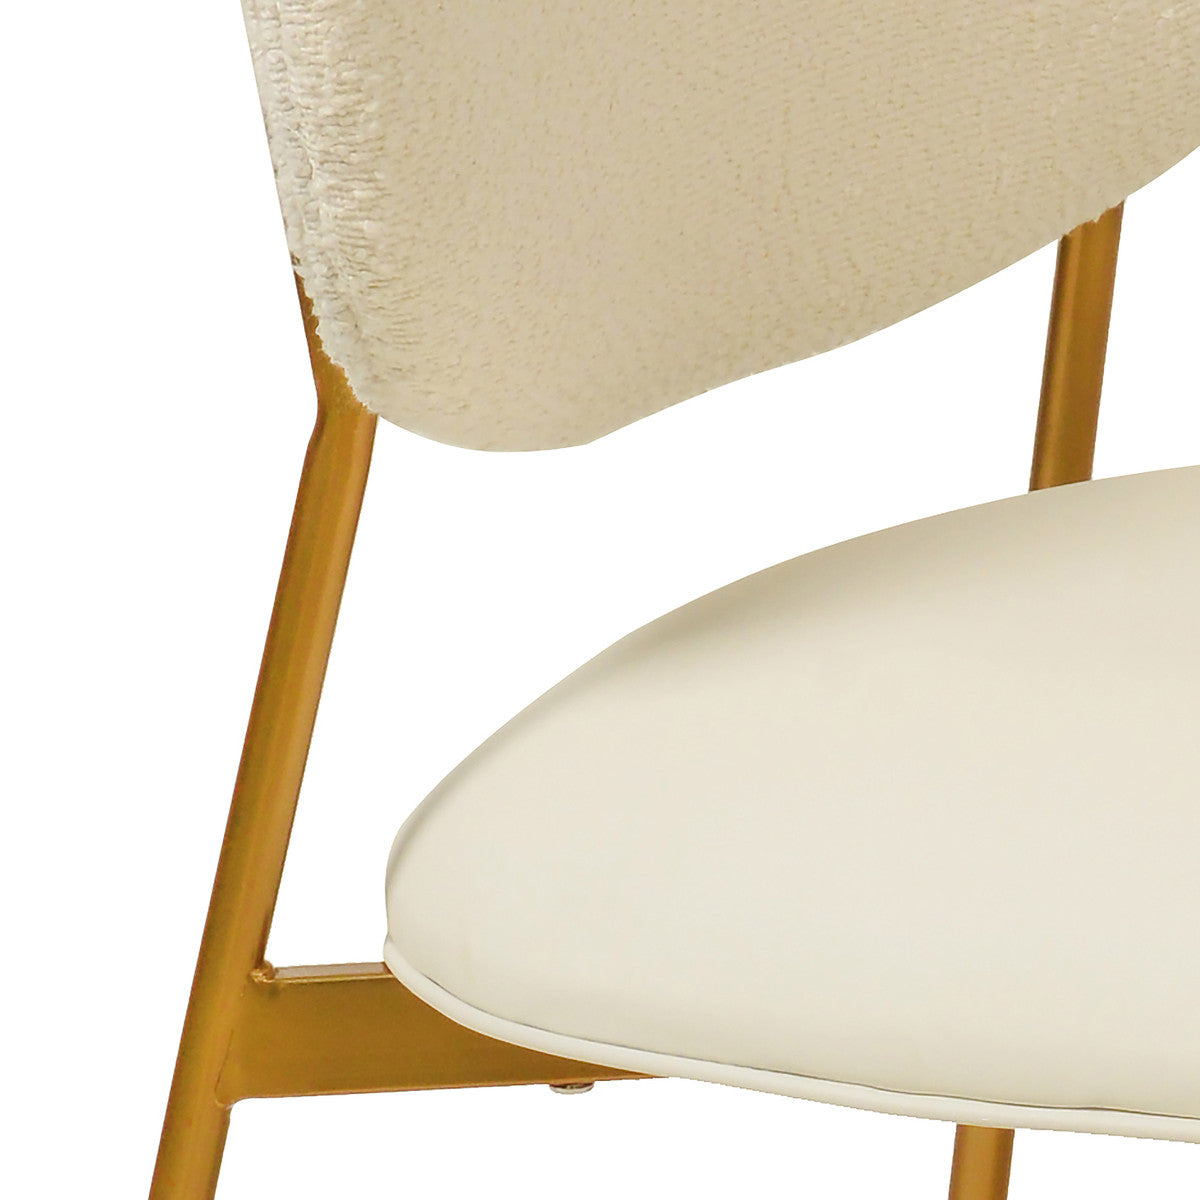 Kaycee Cream Boucle Stackable Dining Chair (Set of 2)